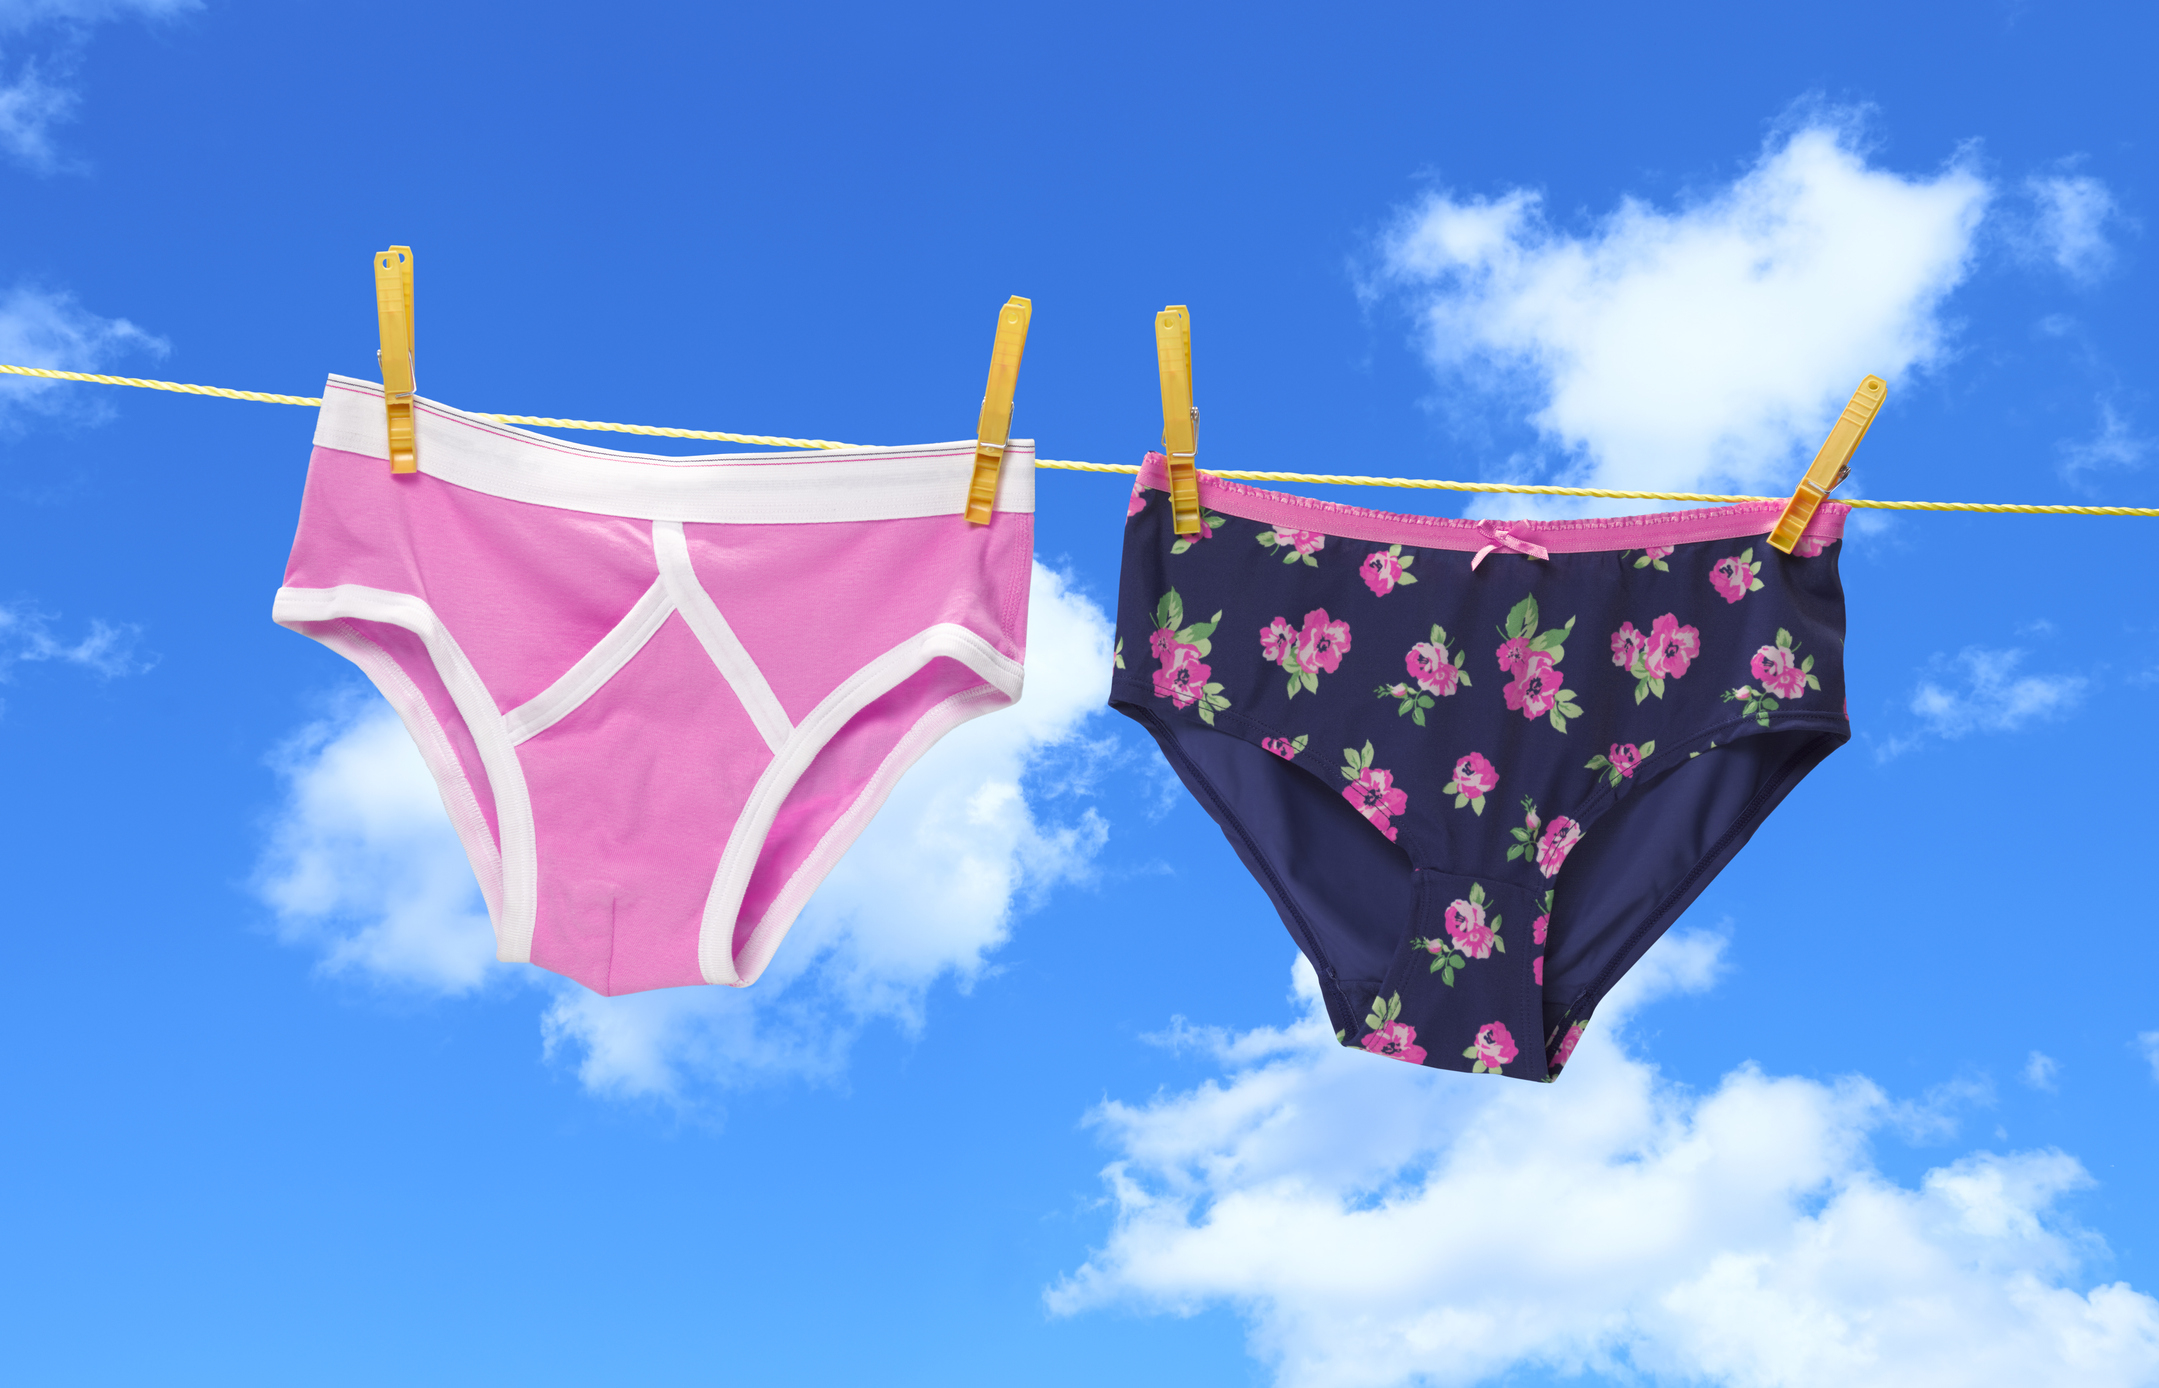 Two pairs of women&#x27;s underwear hanging from a clothesline against a blue sky